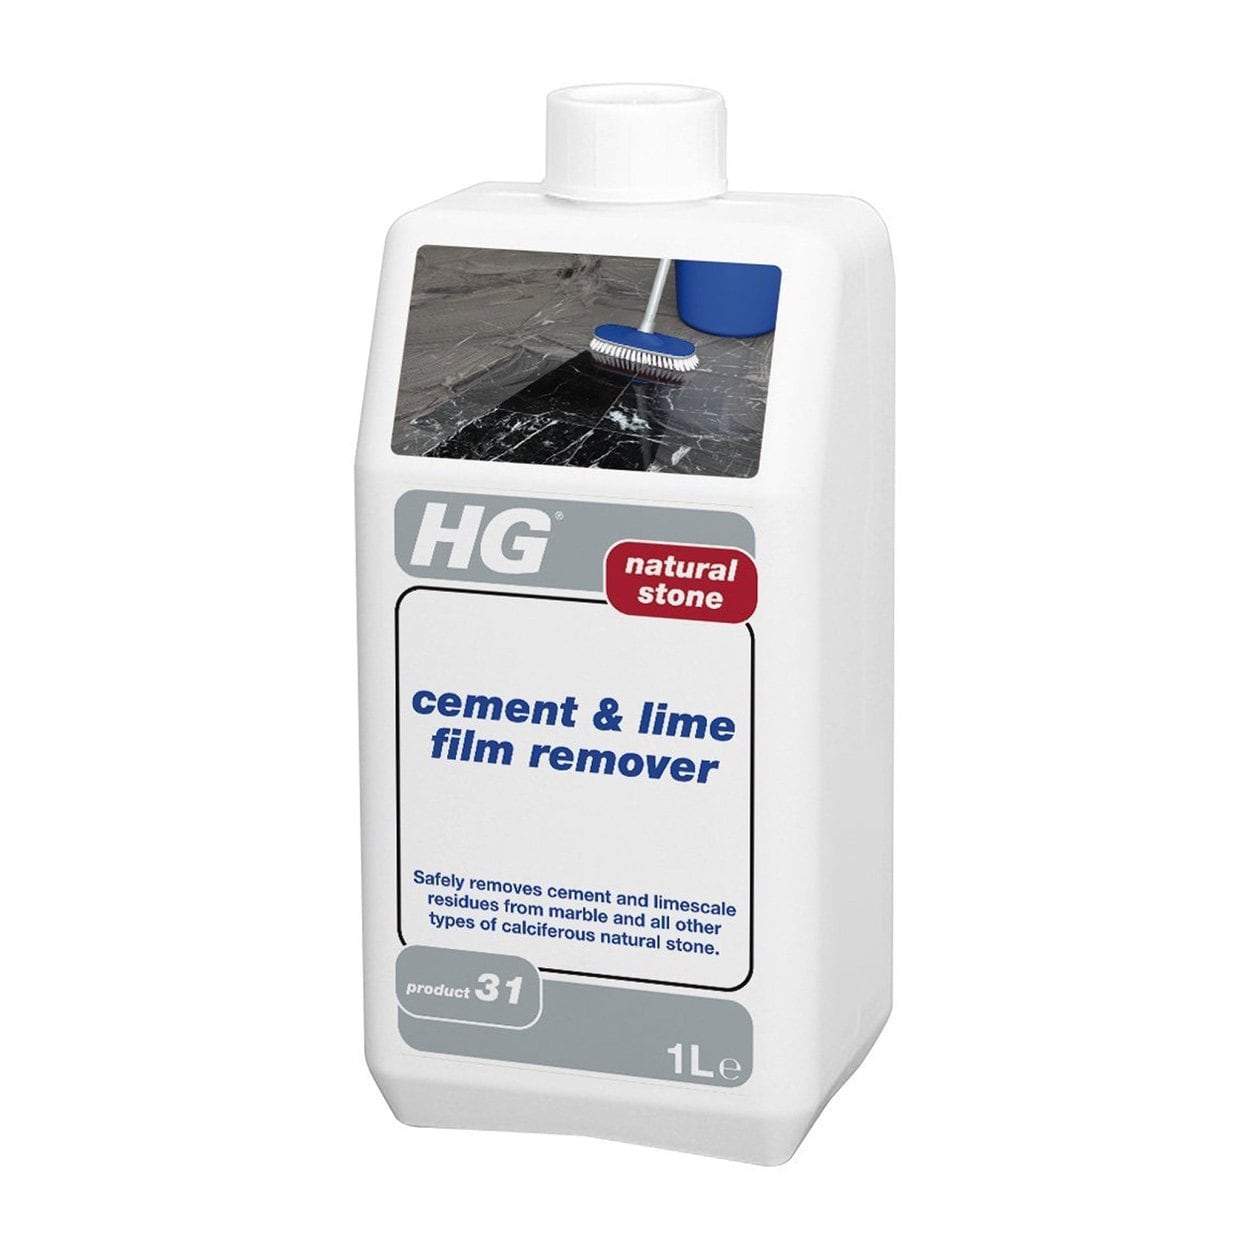 Photo of HG Cement And Lime Film Remover 1 Litre